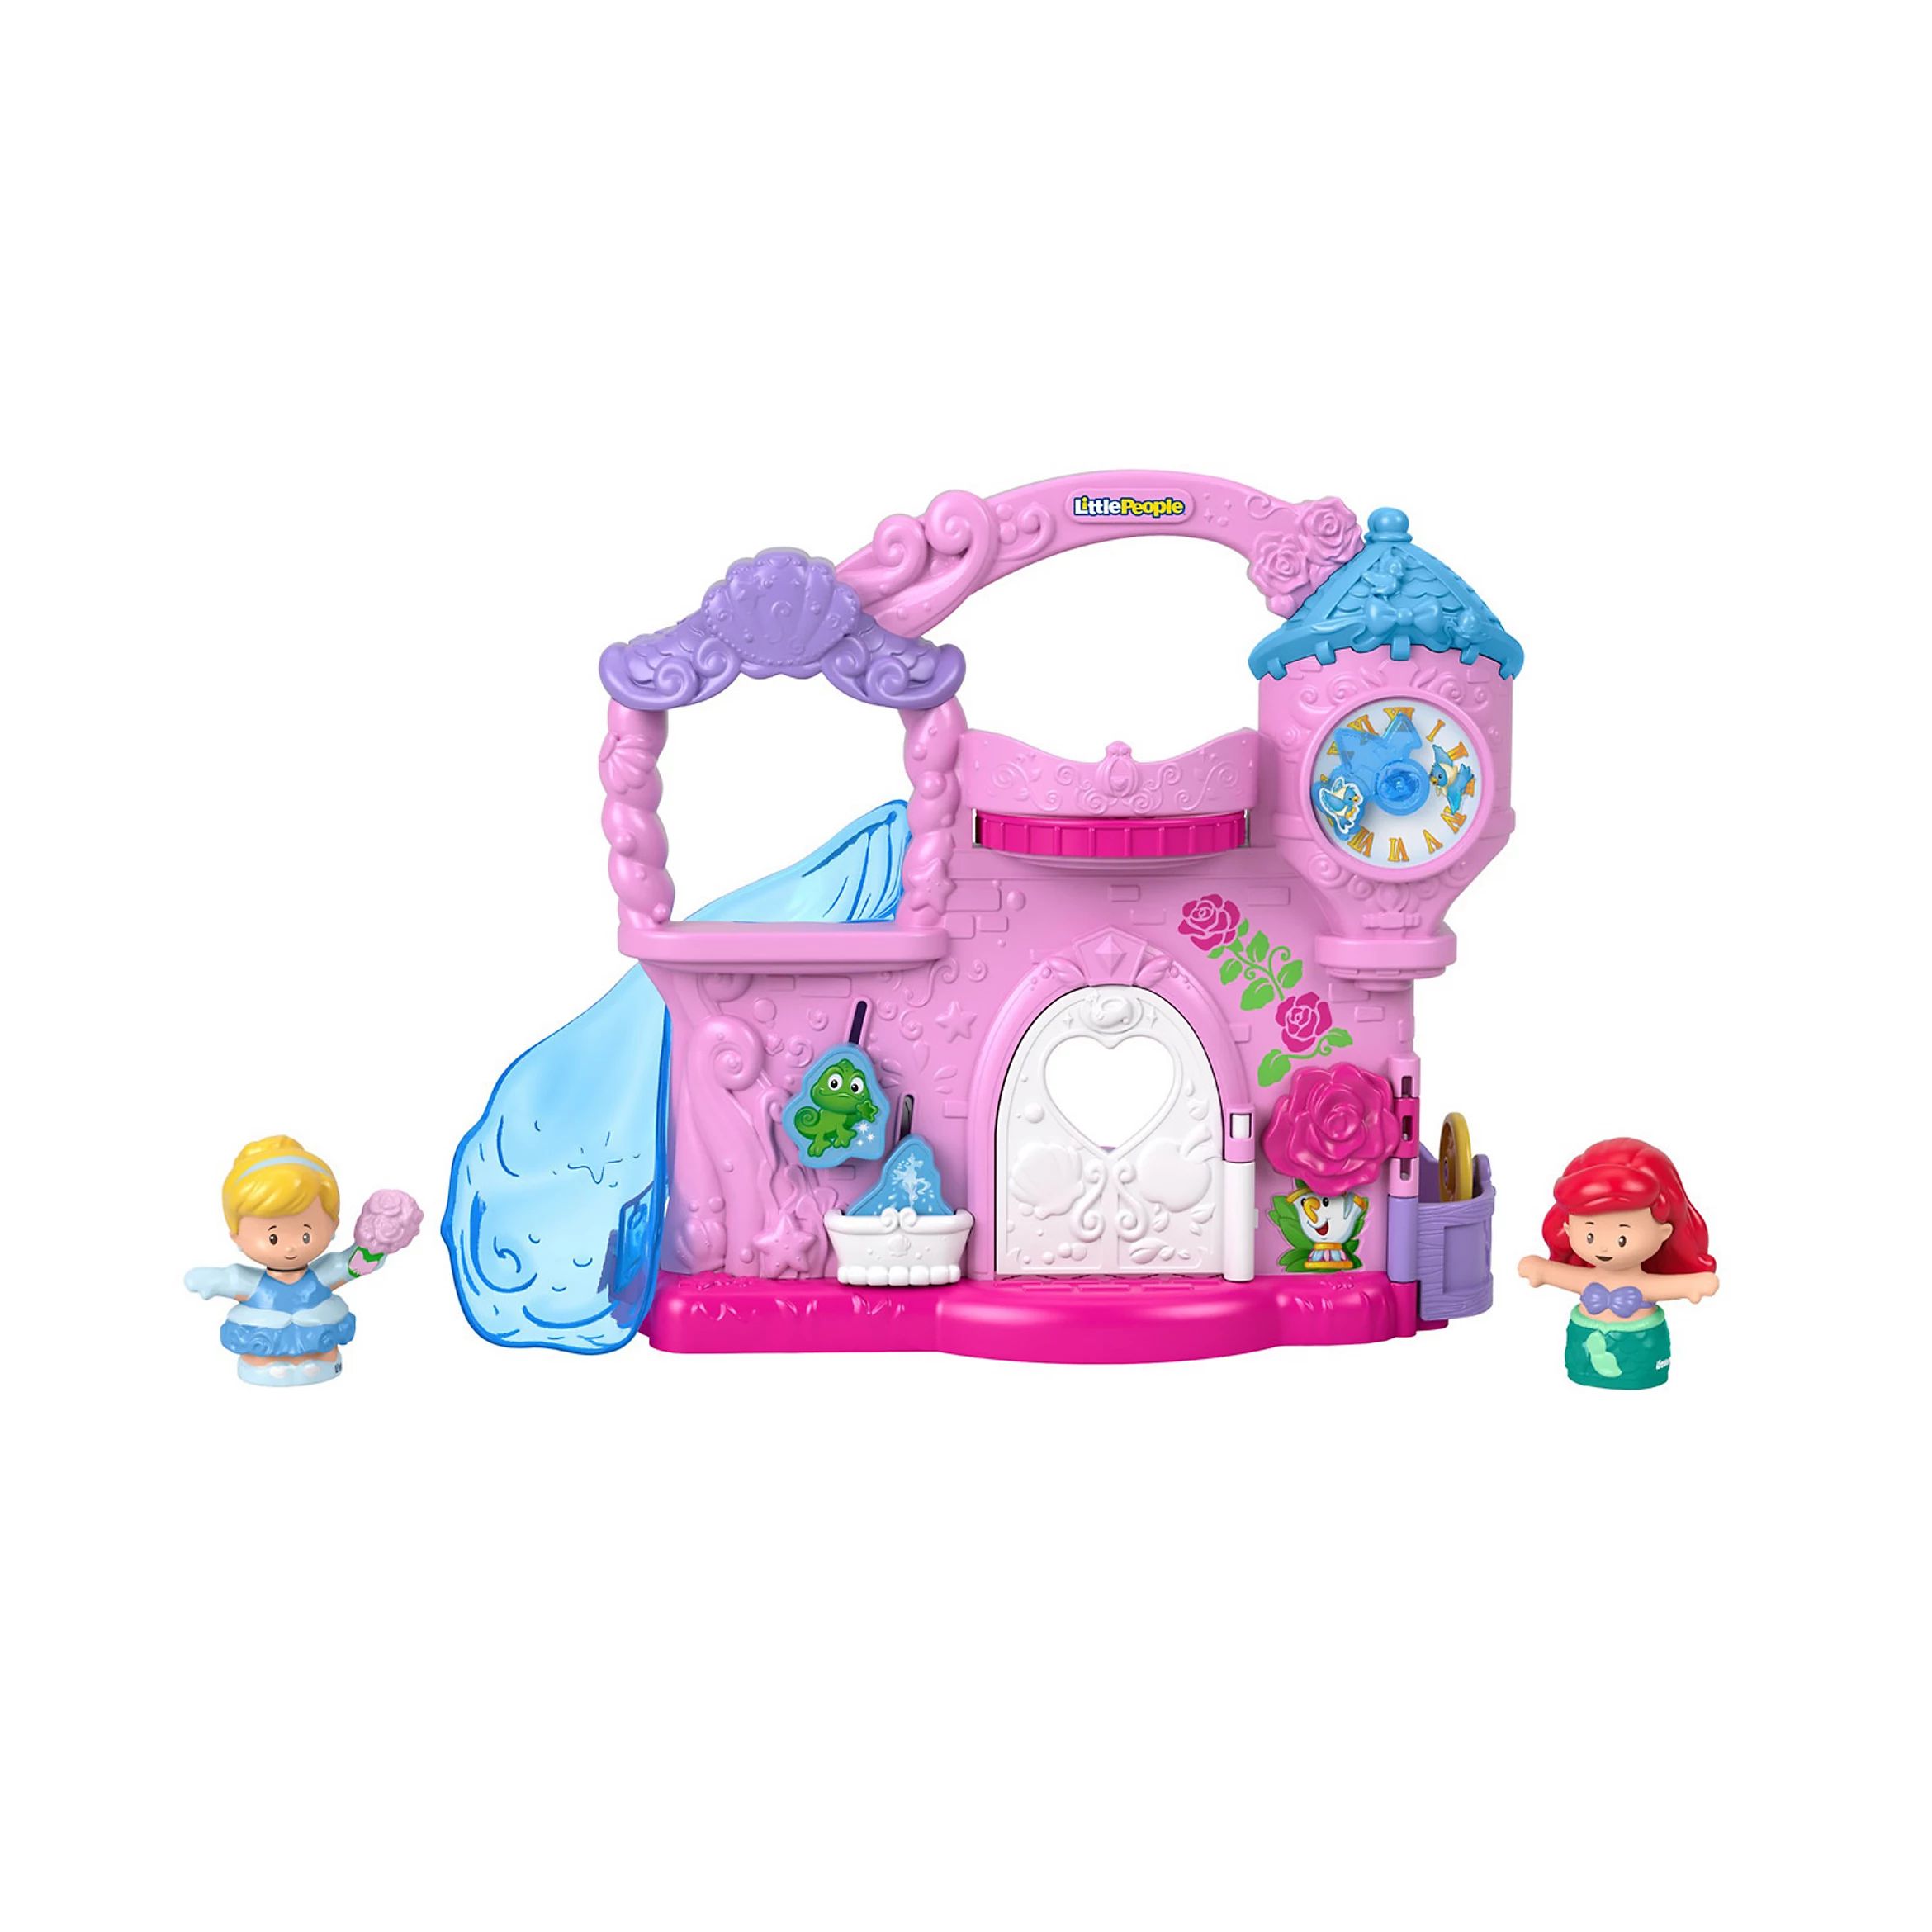 Disney Princess Play & Go Castle by Little People from Fisher-Price | Kohl's